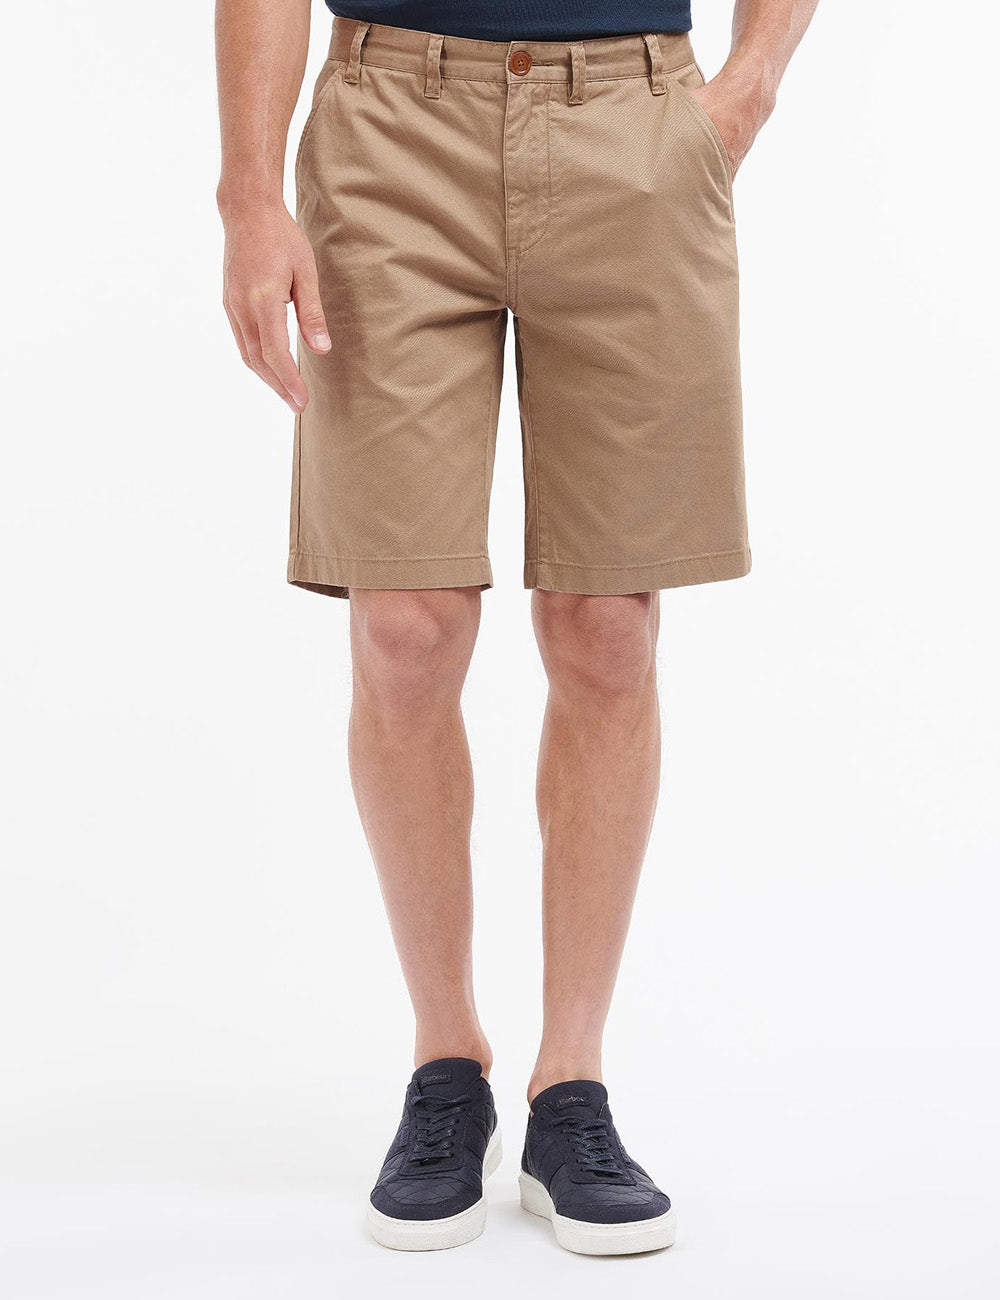 Man wearing the Barbour Neuston City Shorts in Stone